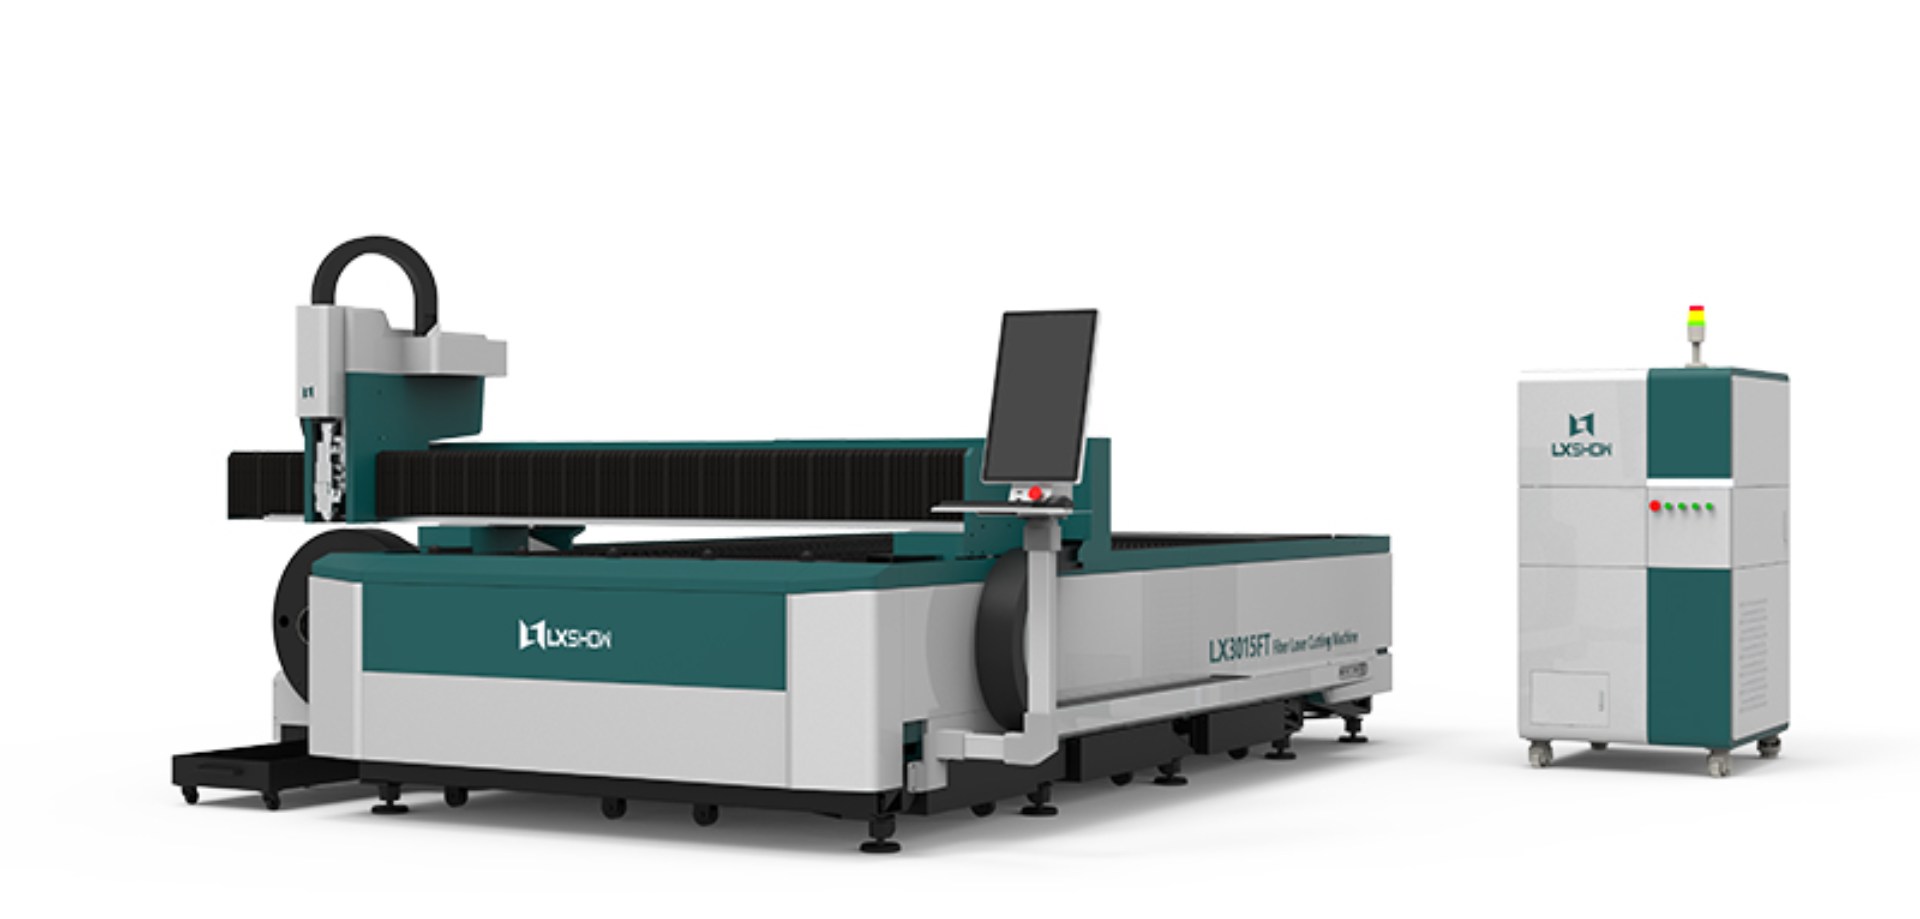 news-LXSHOW After-sales Service at Qatar with its Metal Laser Cutter Machine-Lxshow-img